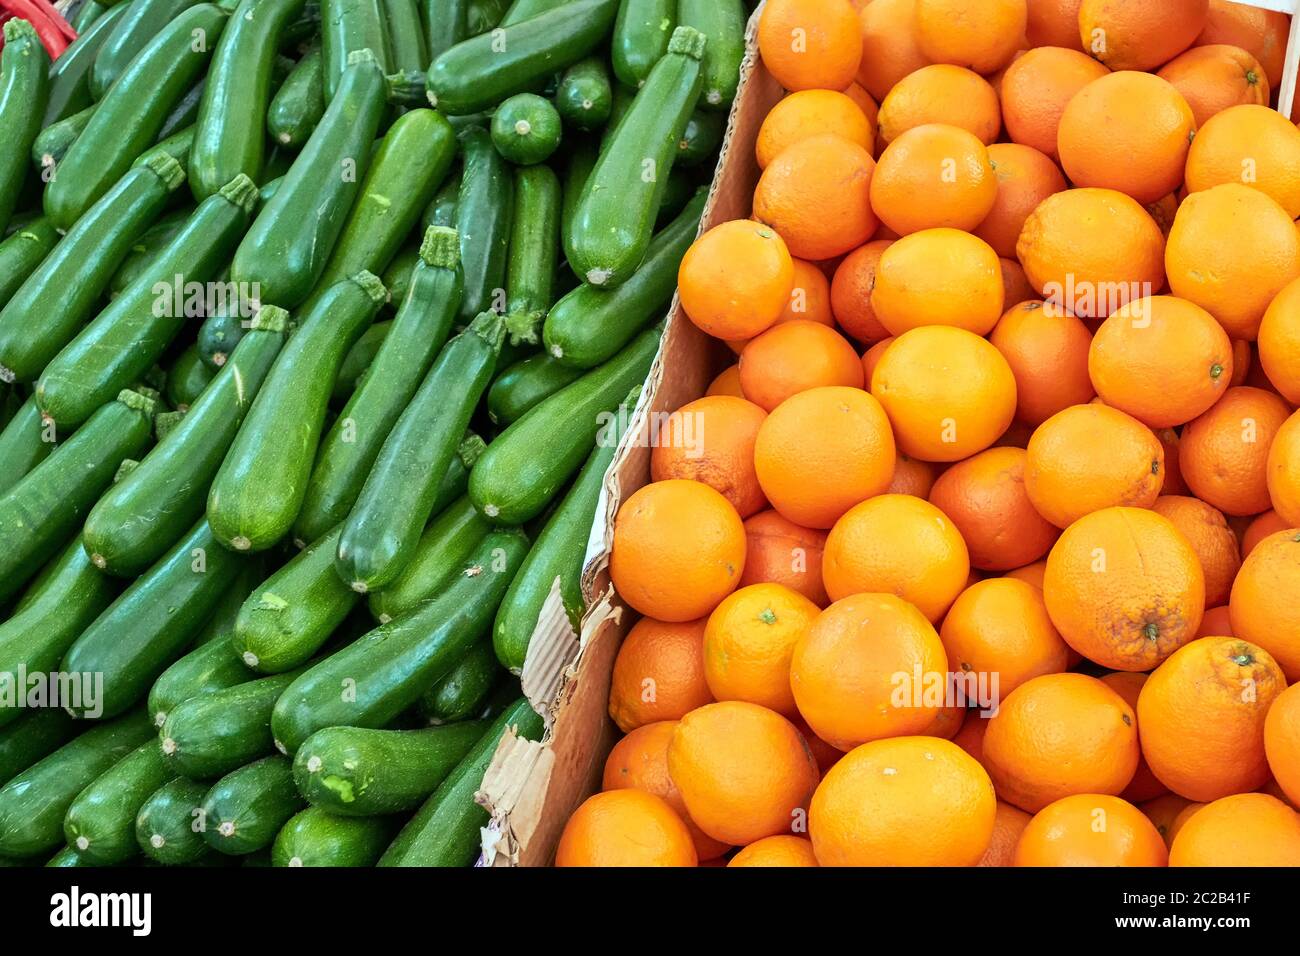 Oranges and gherkins for sale at a market Stock Photo